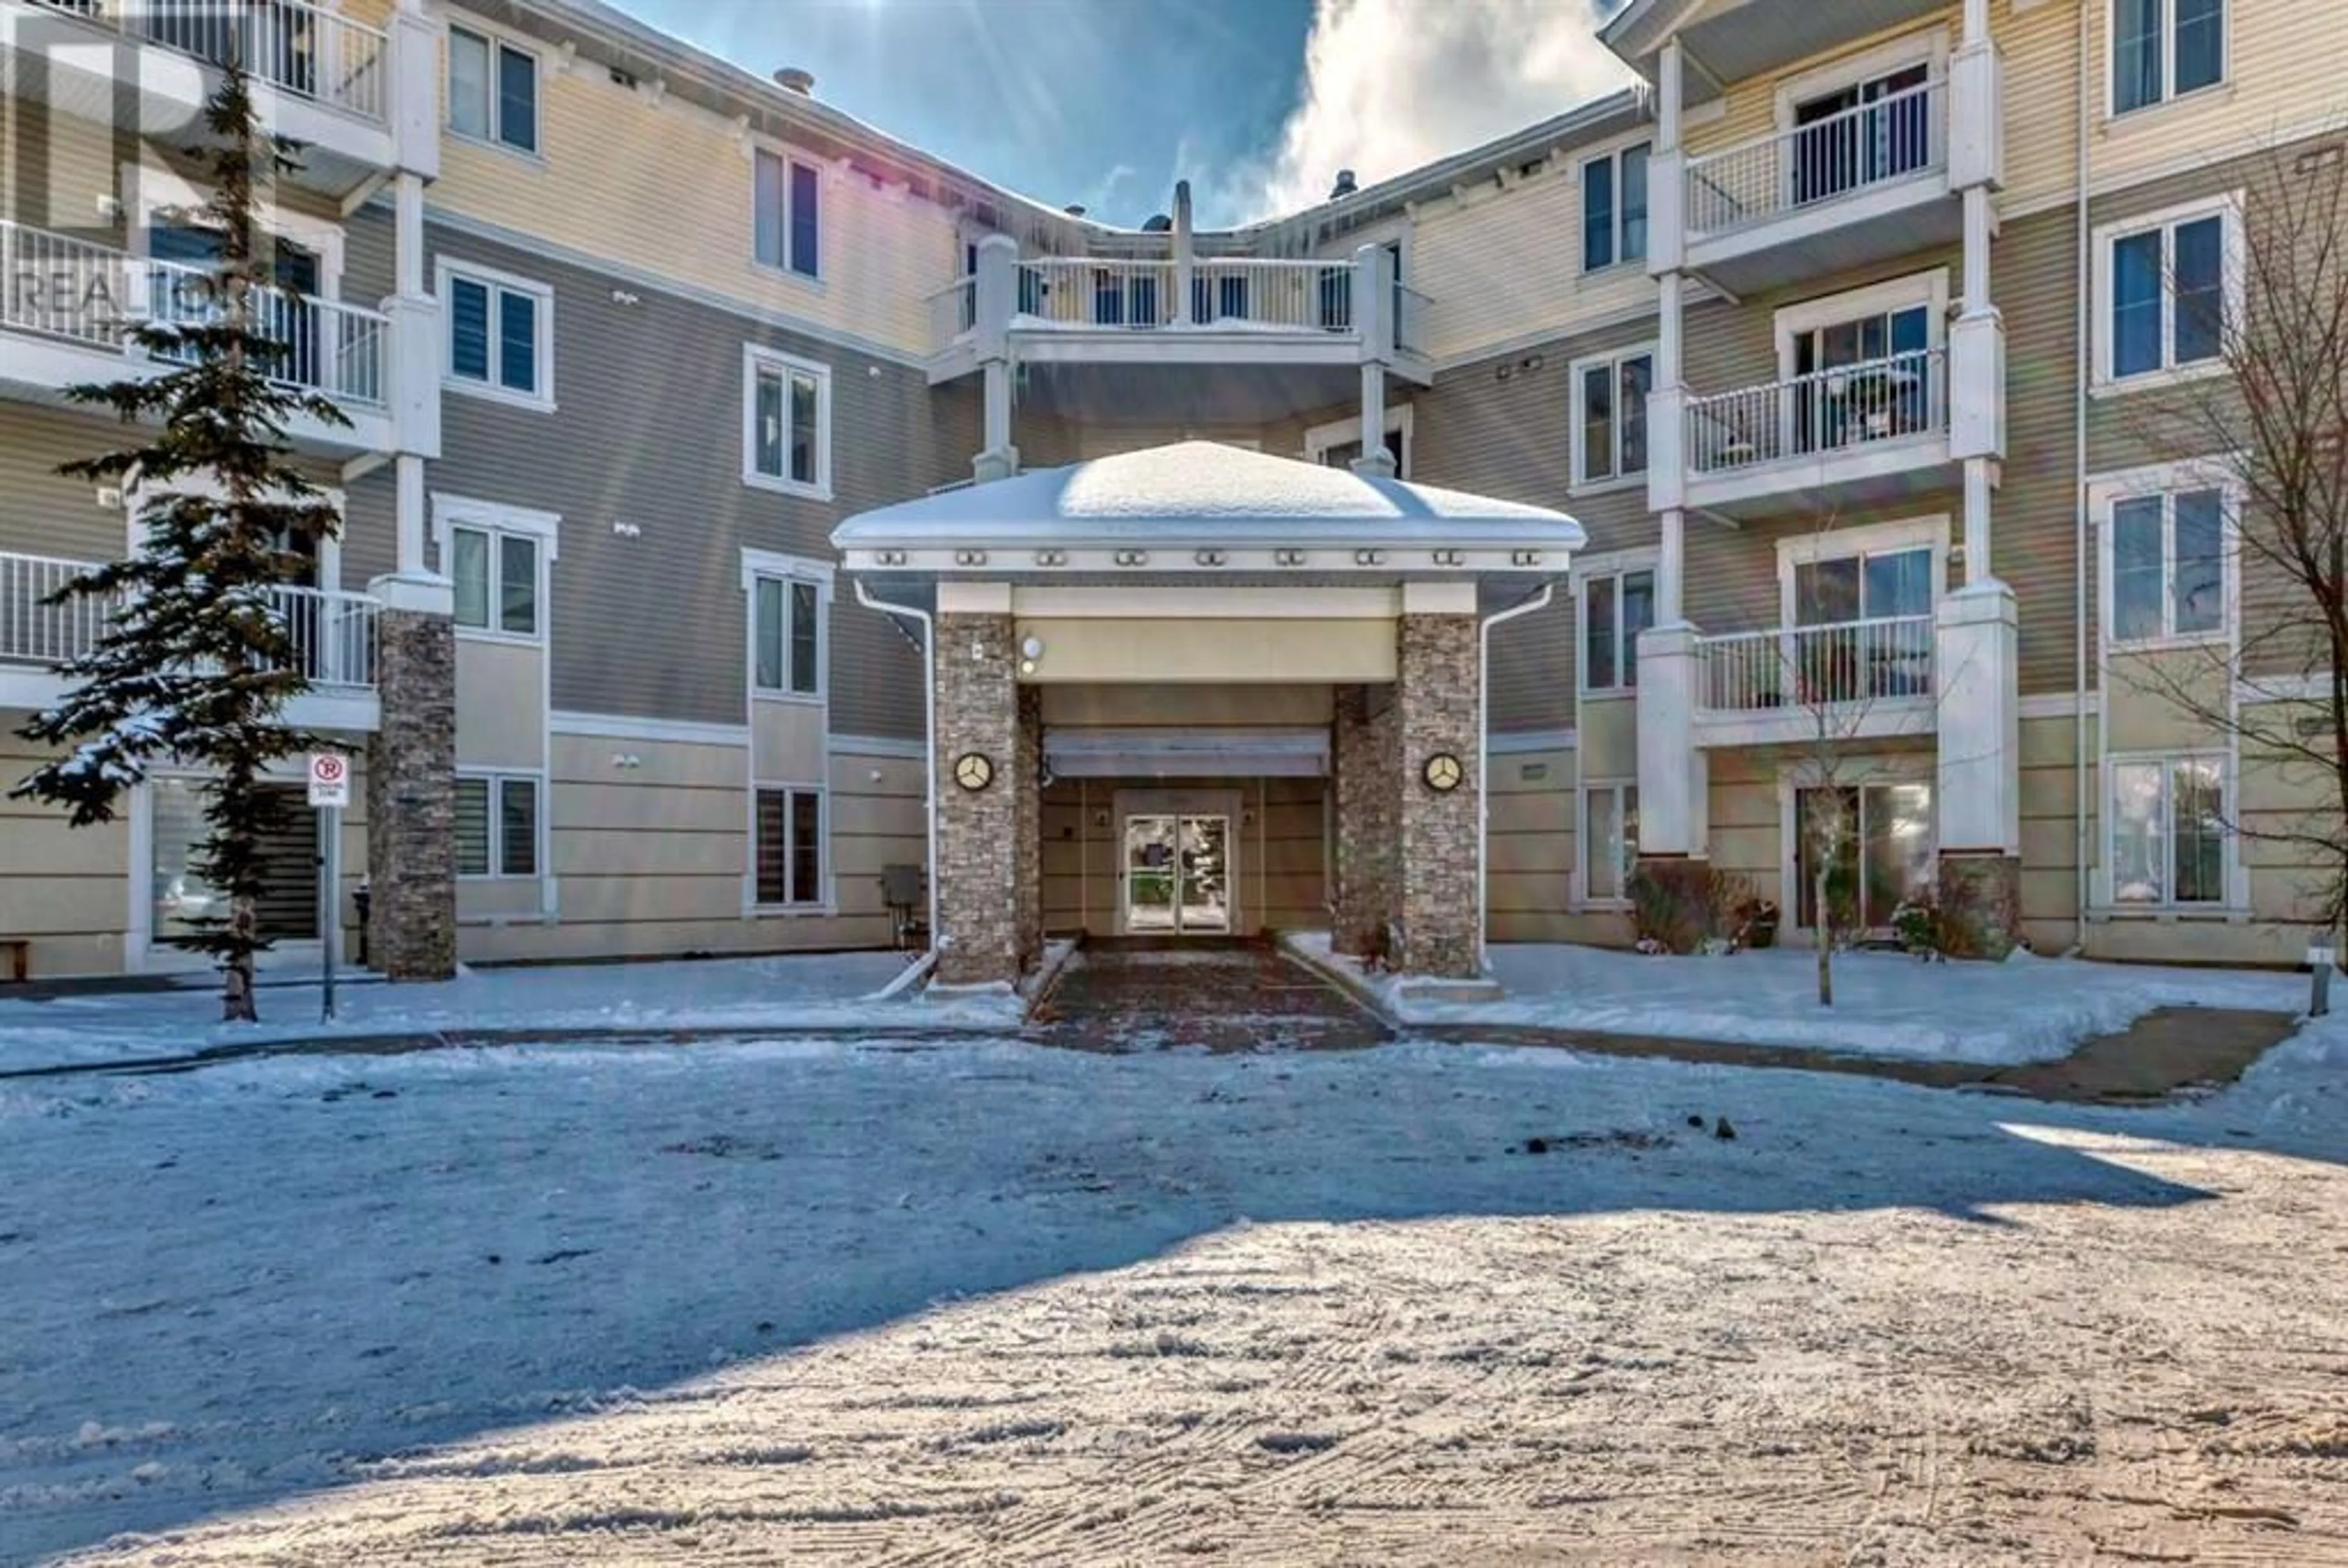 A pic from exterior of the house or condo for 1304 1140 Taradale Drive NE, Calgary Alberta T3J0G1